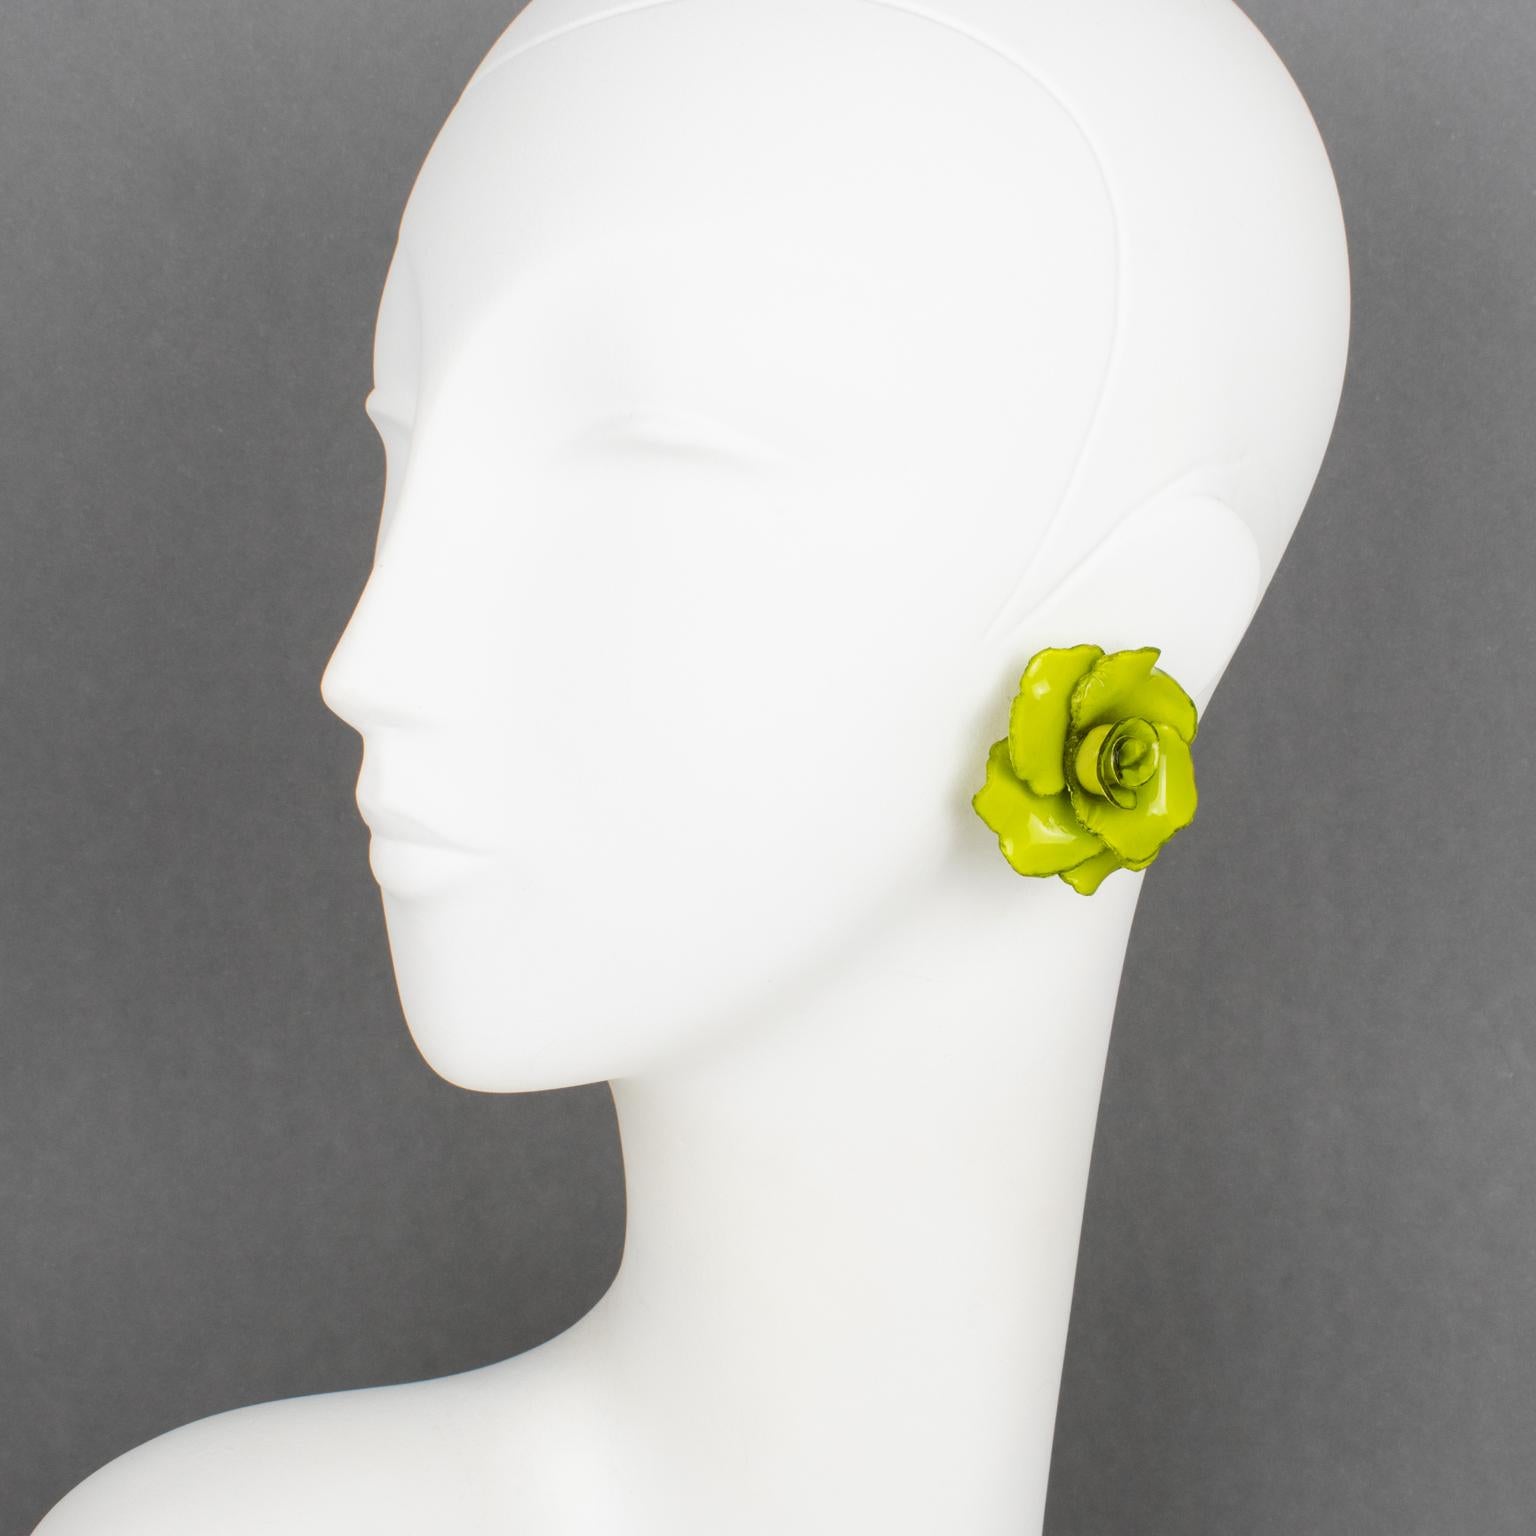 Cilea Paris designed these romantic clip-on earrings for French jewelry designer Francoise Montague. The dimensional resin shape features rose flowers in elegant avocado-green colors. There is no visible signature like all the vintage Francoise